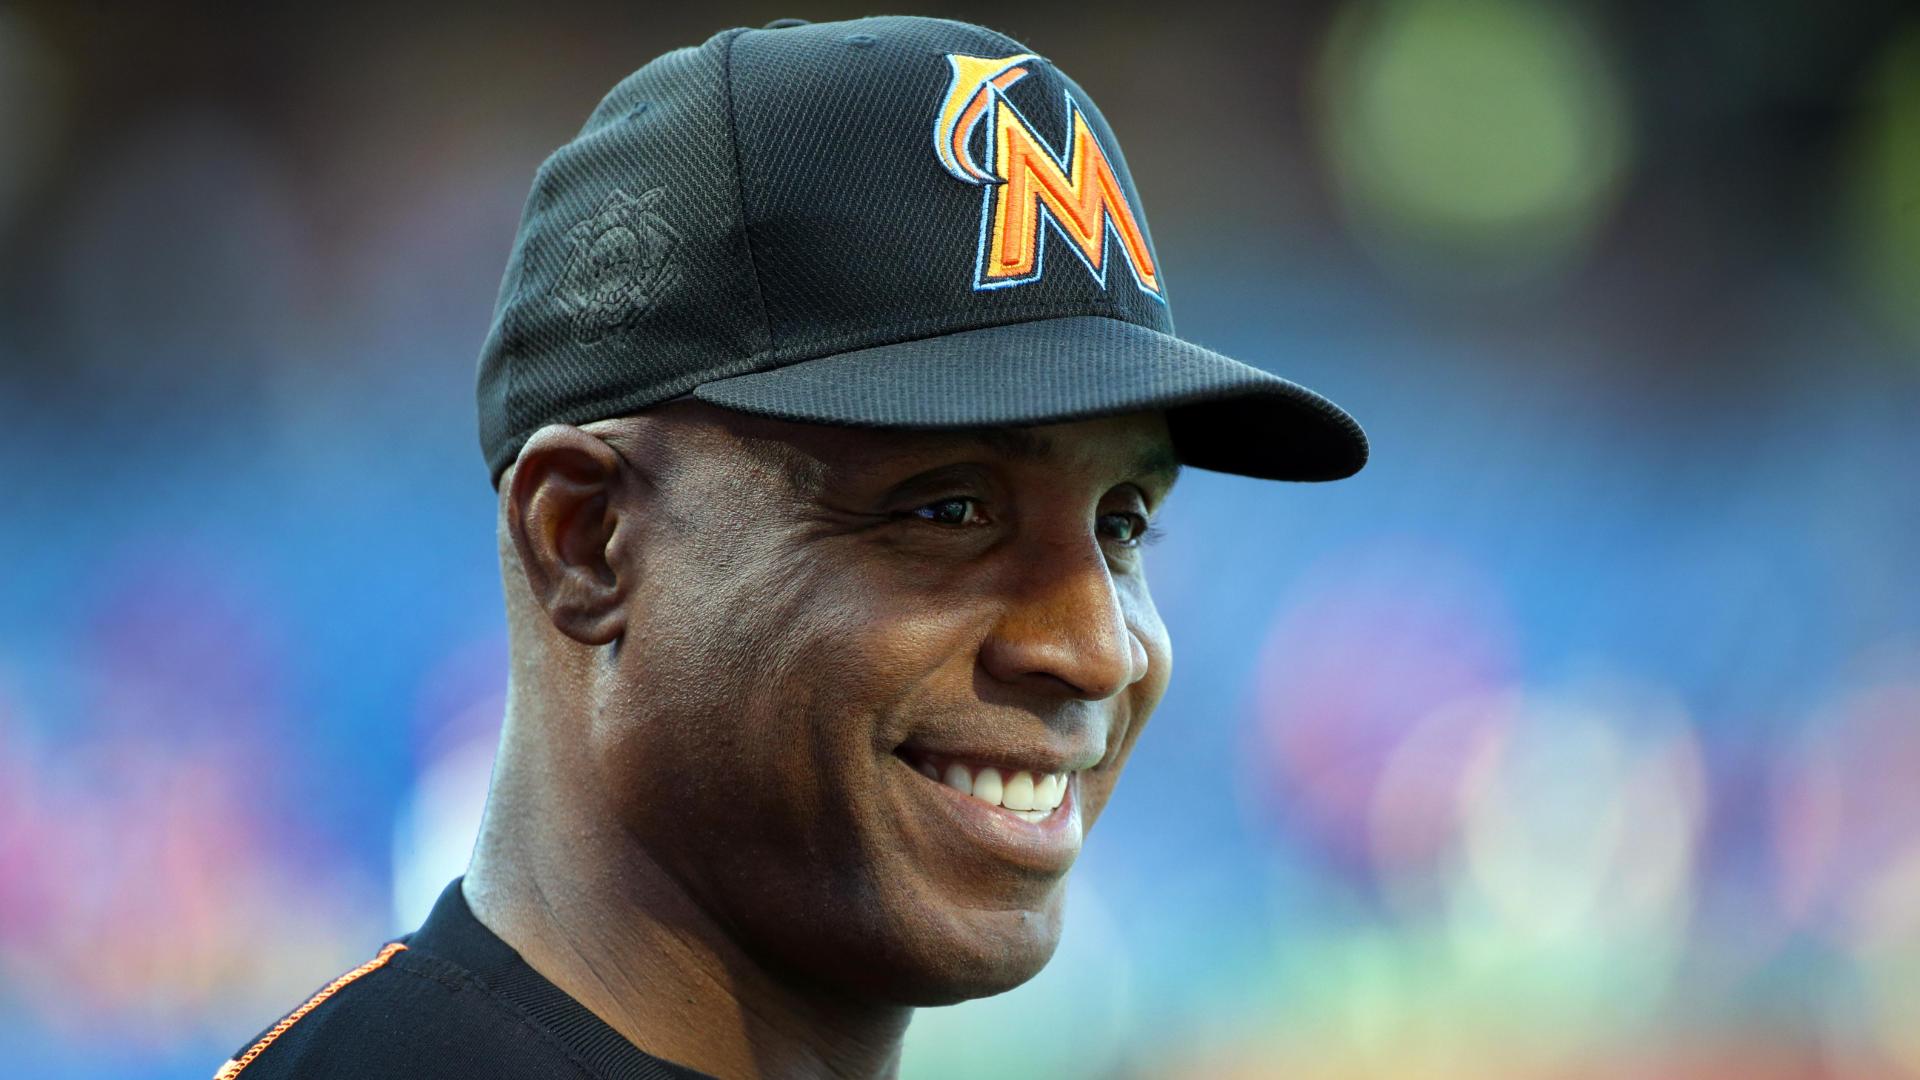 Barry Bonds regrets how he acted as a player: 'I was straight stupid